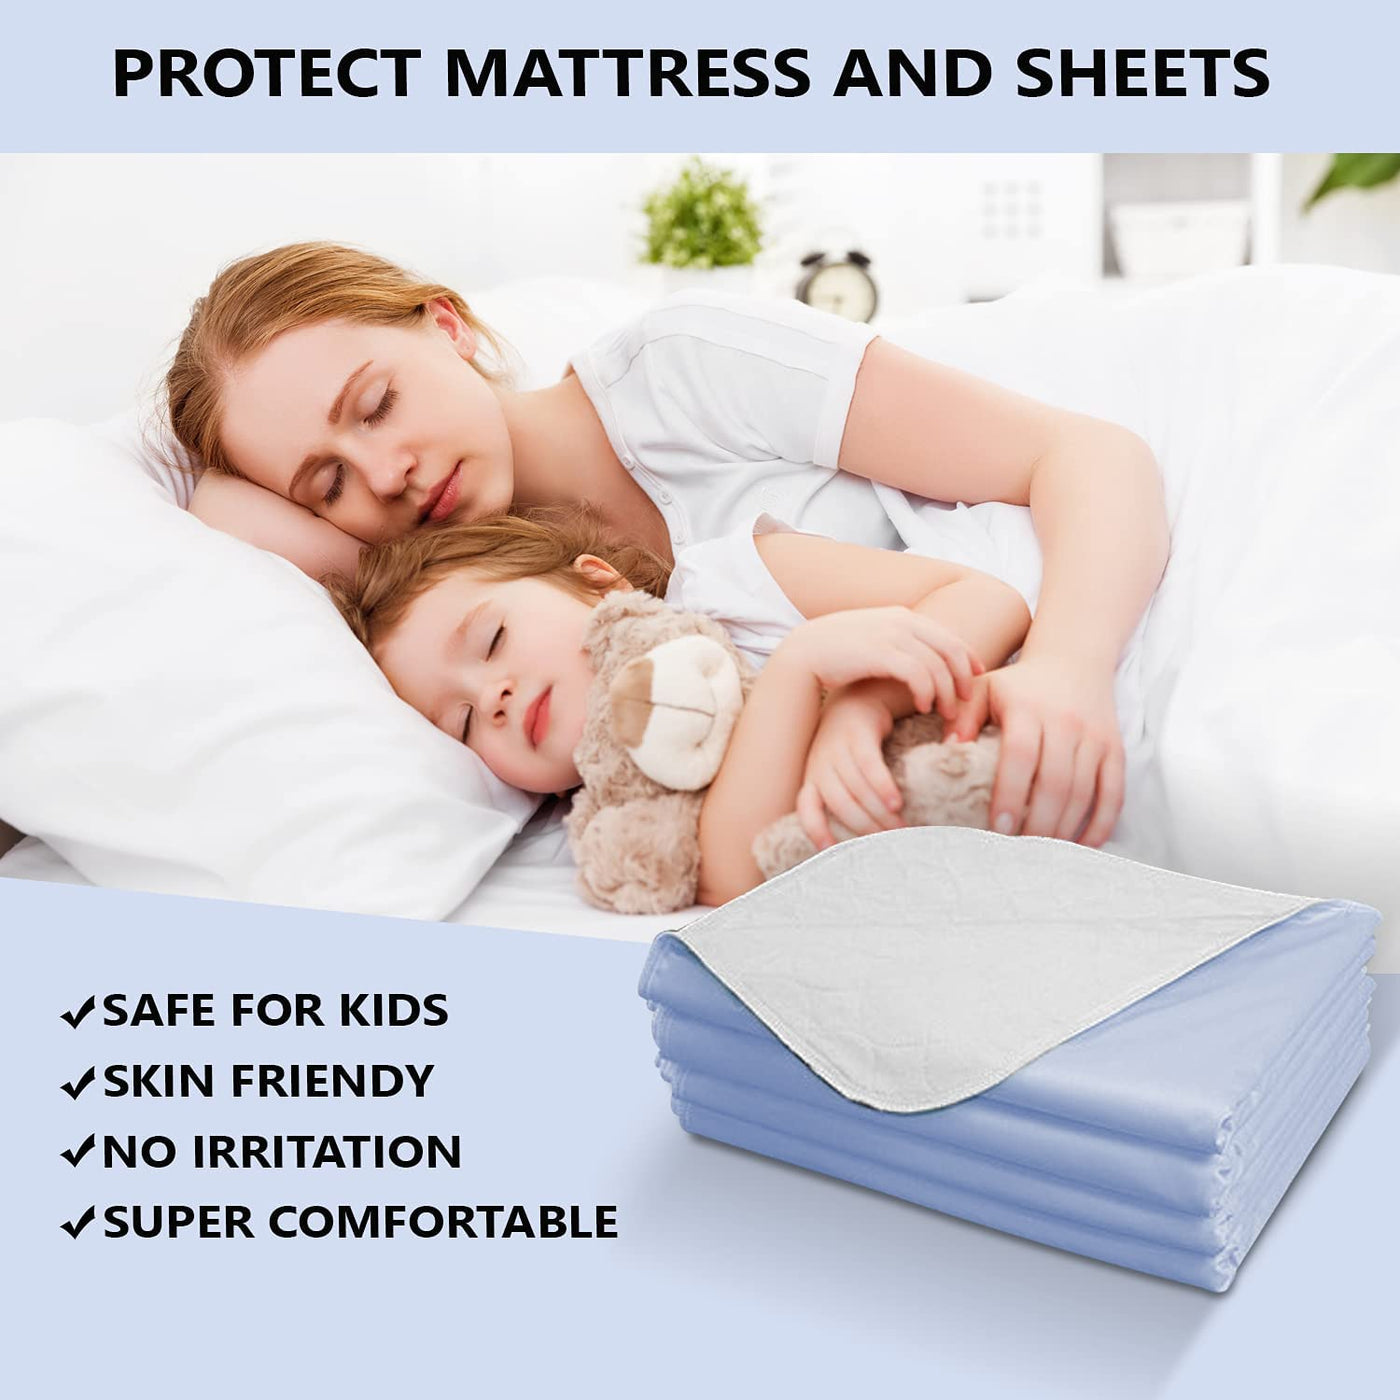 Reusable/Washable Waterproof Bed Pads for Children or Adults (Blue)